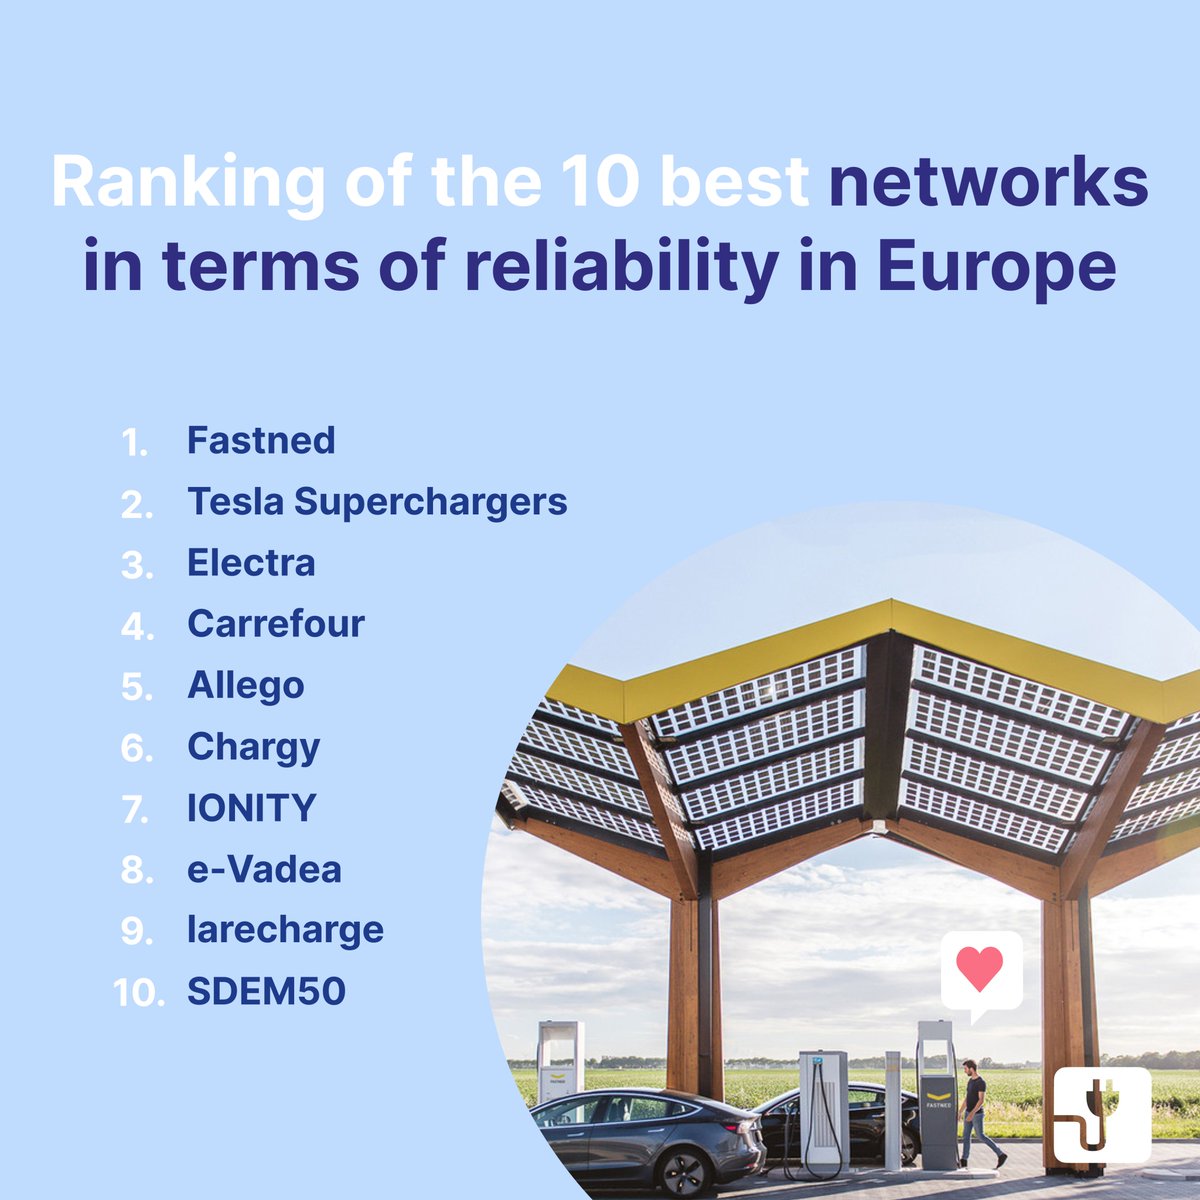 🇪🇺🏆 2023 Ranking of the Best Charging Networks in Europe! Based on 390,000 ratings submitted by over 112,000 unique users on the Chargemap platform. To see the French and Belgian rankings, click here 👉 bit.ly/TOP2023europe 👏 @Tesla Superchargers, @Fastned, @go_Electra ,…